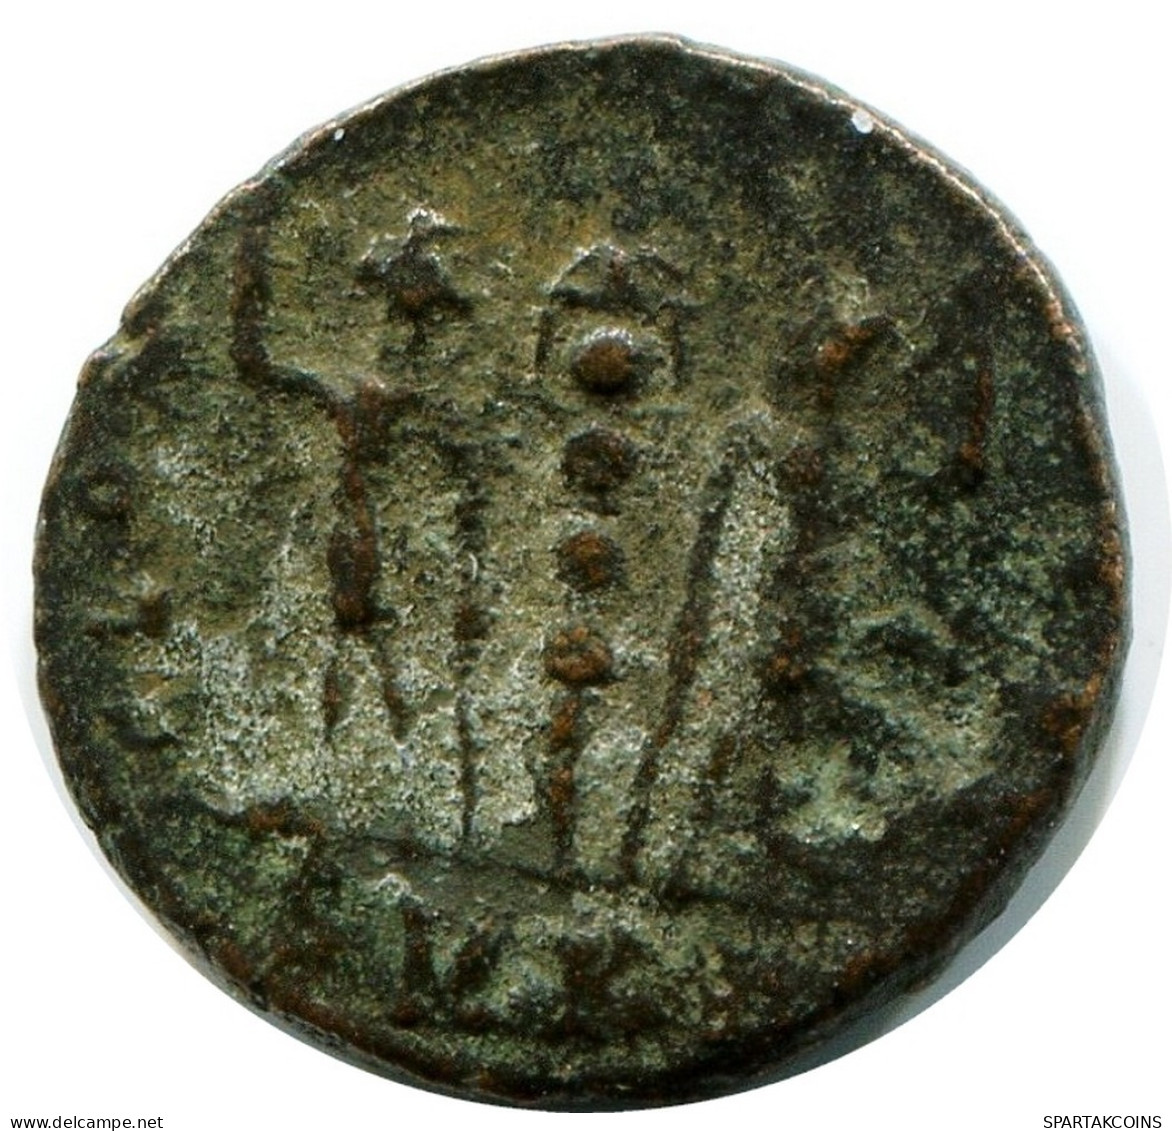 CONSTANS MINTED IN CYZICUS FOUND IN IHNASYAH HOARD EGYPT #ANC11584.14.F.A - The Christian Empire (307 AD Tot 363 AD)